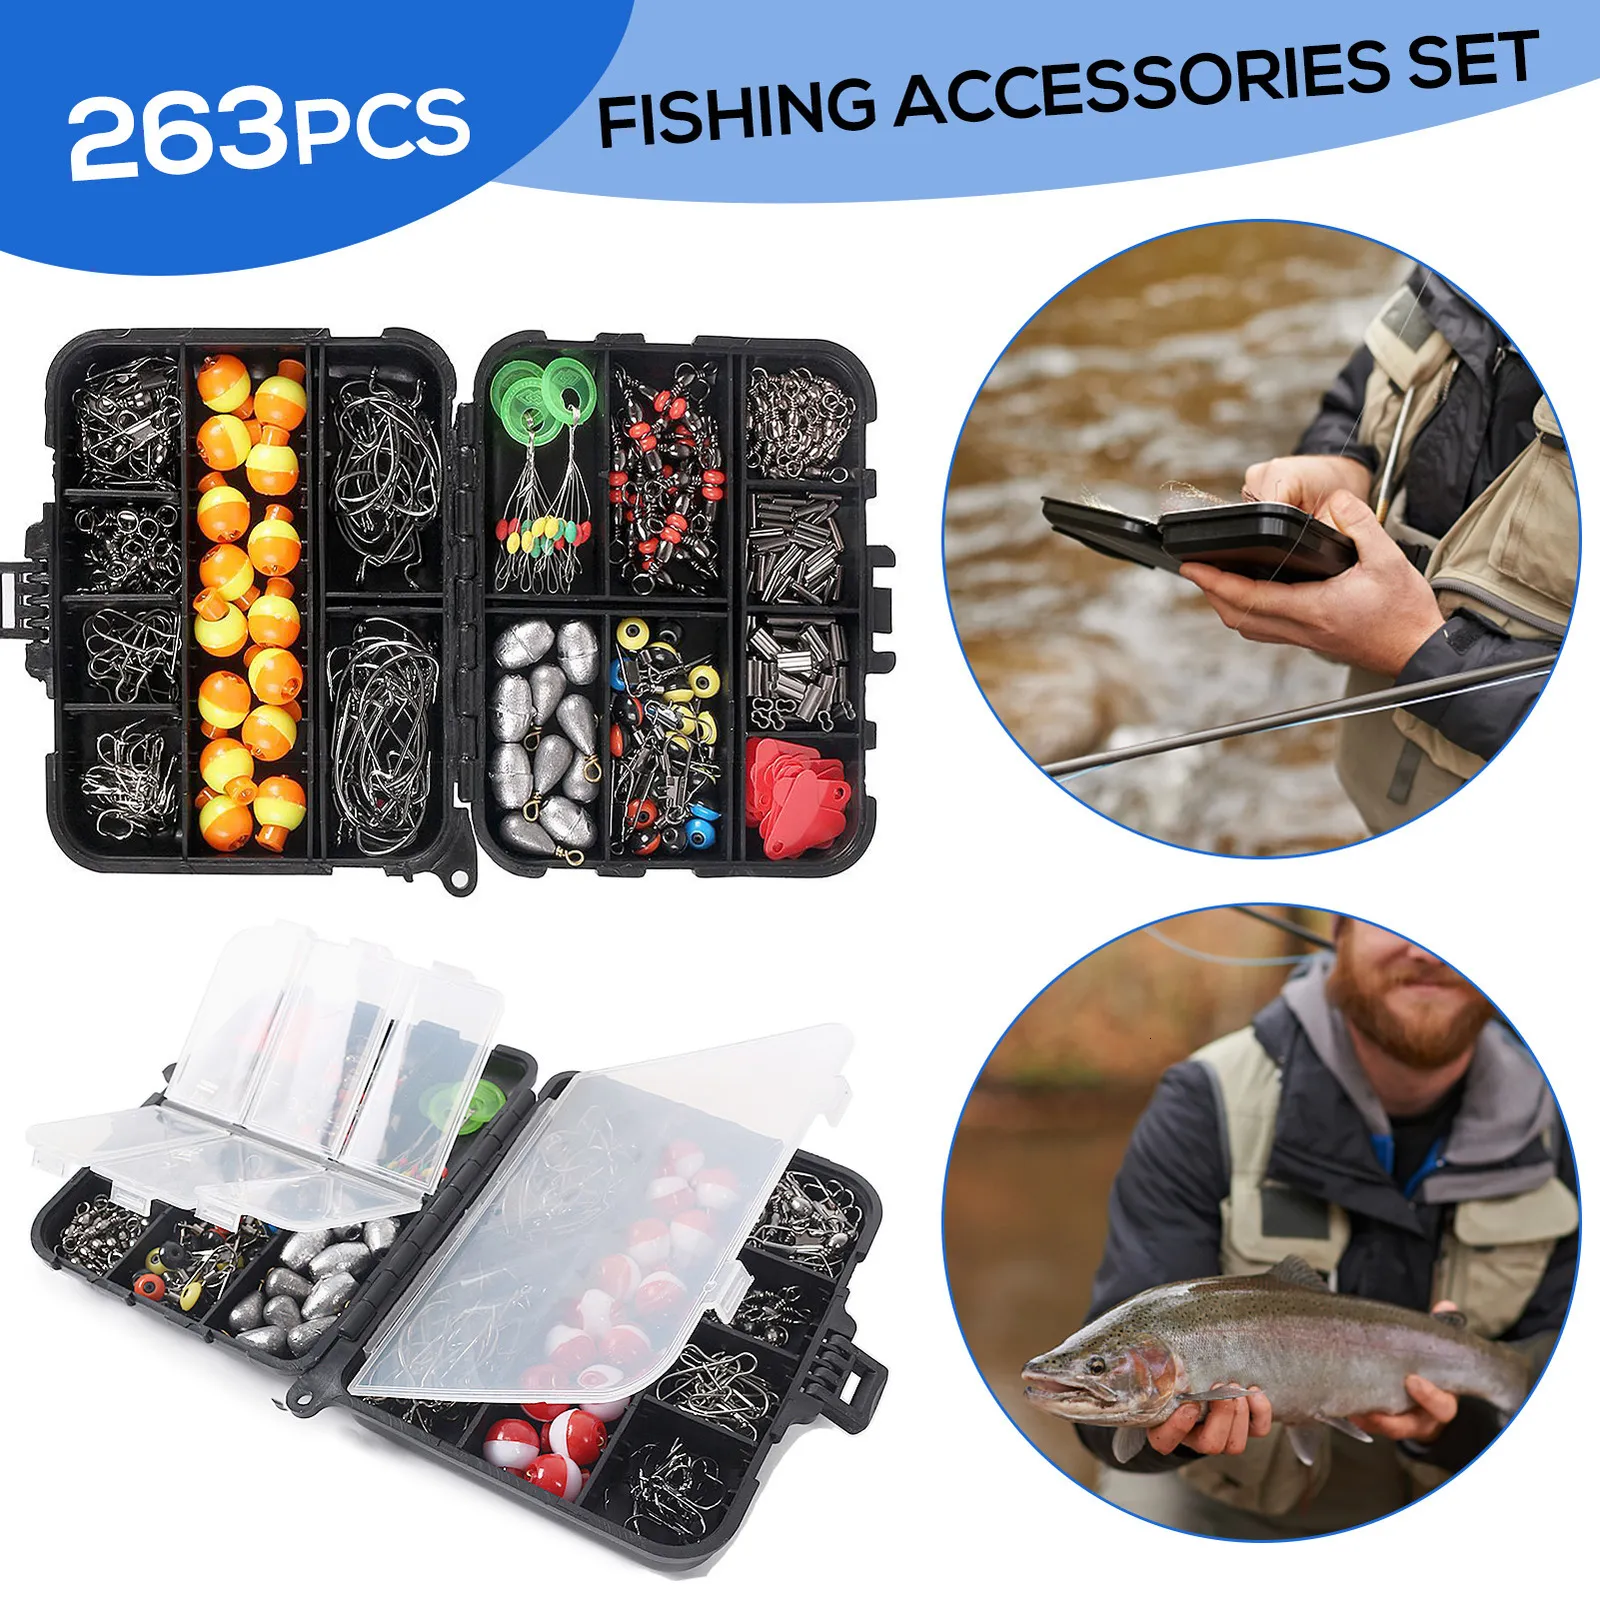 Fishing Hooks Set Fishing Accessories Set With Tackle Box Including Plier  Jig Hooks Sinker Weight Swivels Snaps Sinker Slides 230603 From Wai06,  $13.41